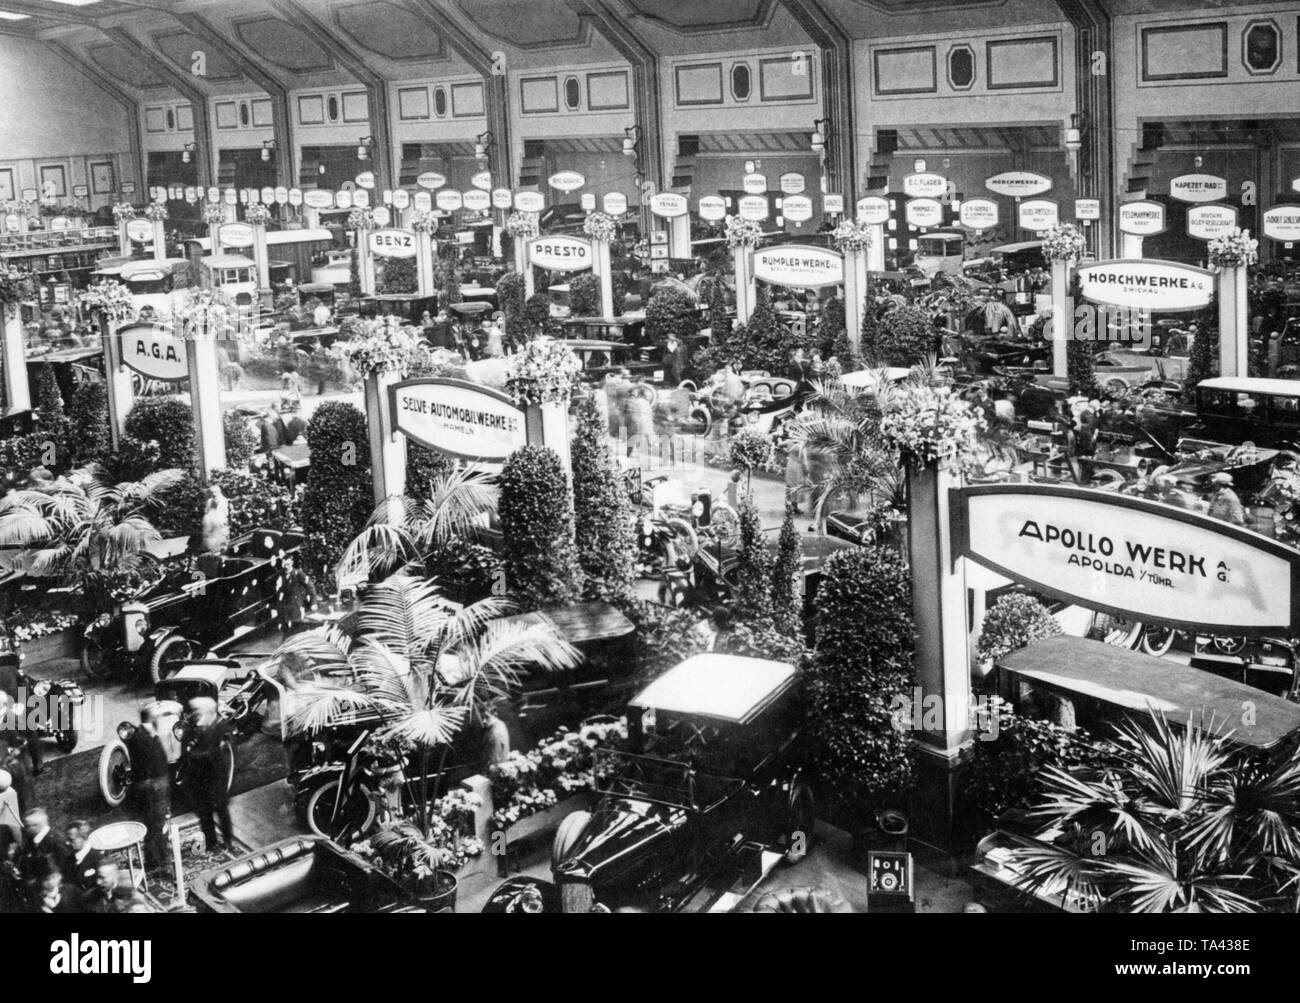 The exhibition hall of the first German Motor Show in 1921, that was attended by all the major German car manufacturers. Stock Photo